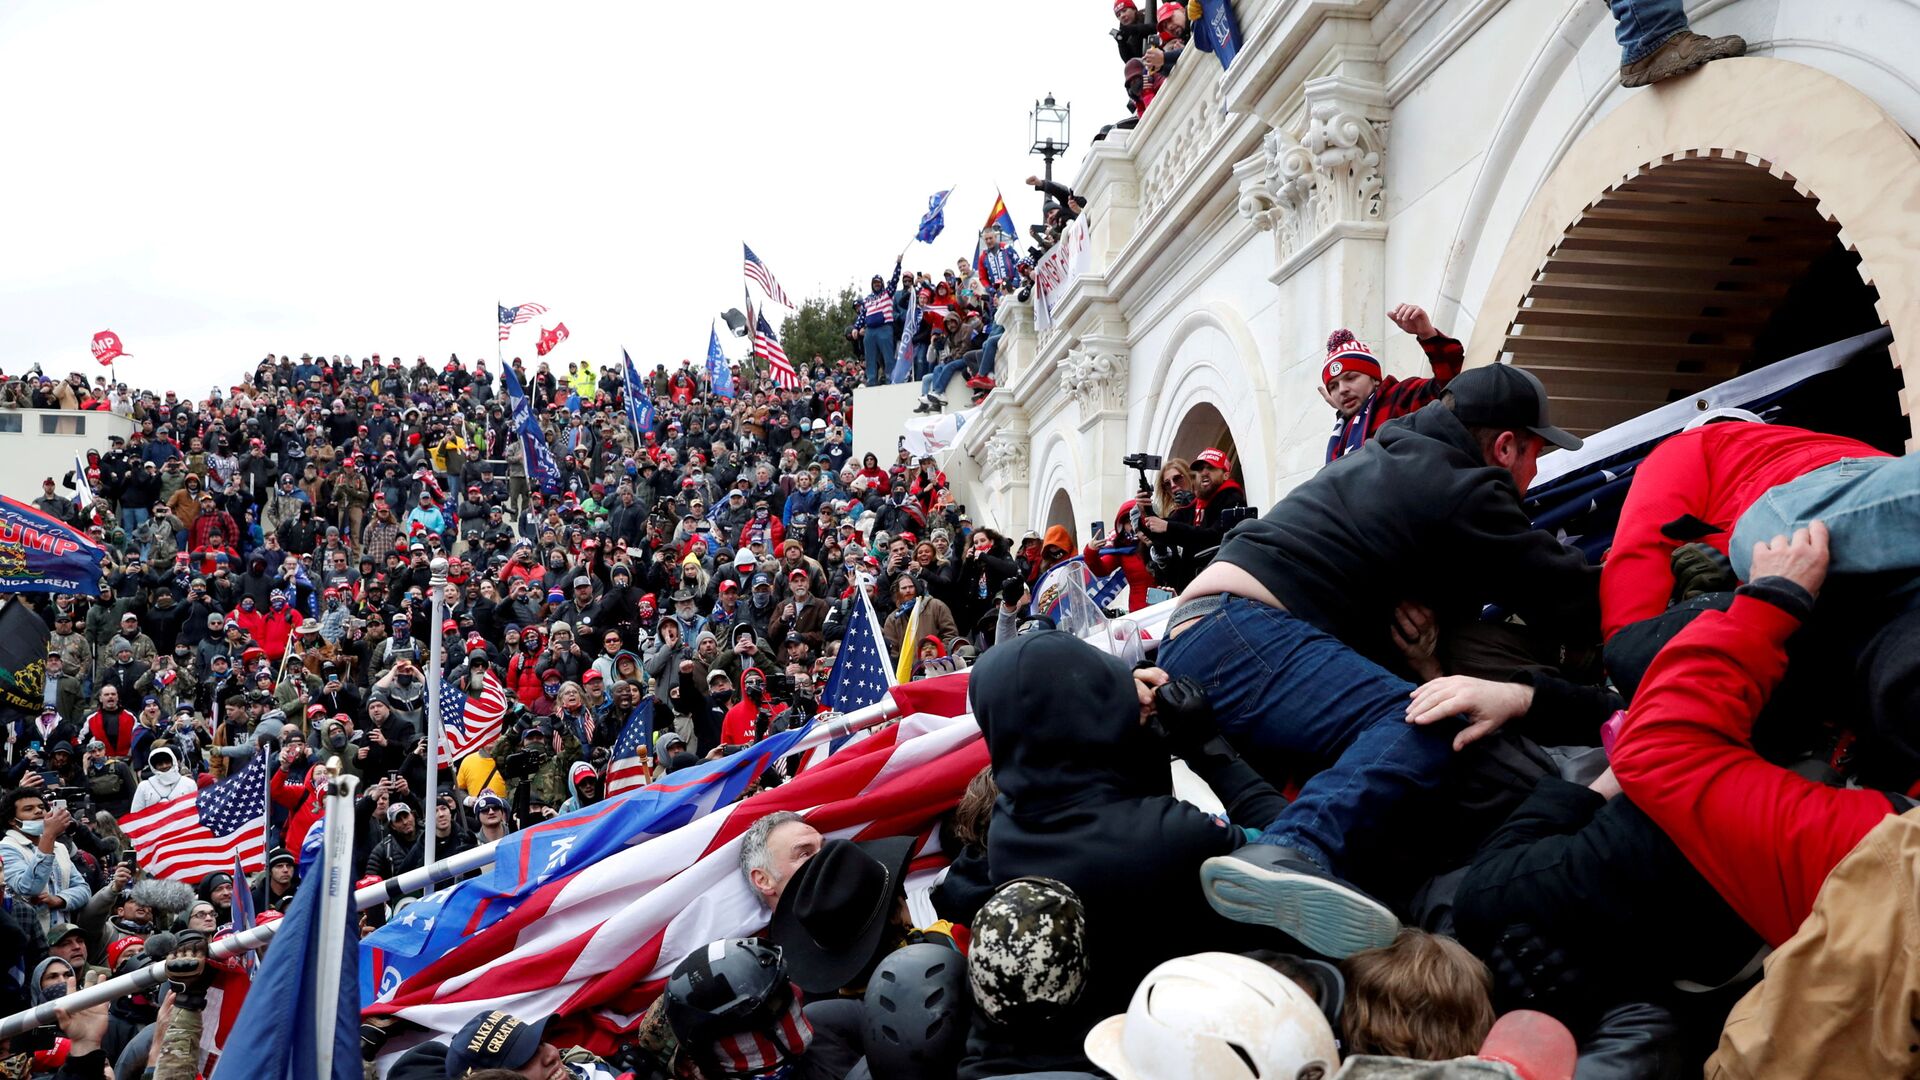  Pro-Trump protesters storm into the U.S. Capitol during clashes with police, during a rally to contest the certification of the 2020 U.S. presidential election results by the U.S. Congress, in Washington, U.S, January 6, 2021 - Sputnik International, 1920, 07.08.2021